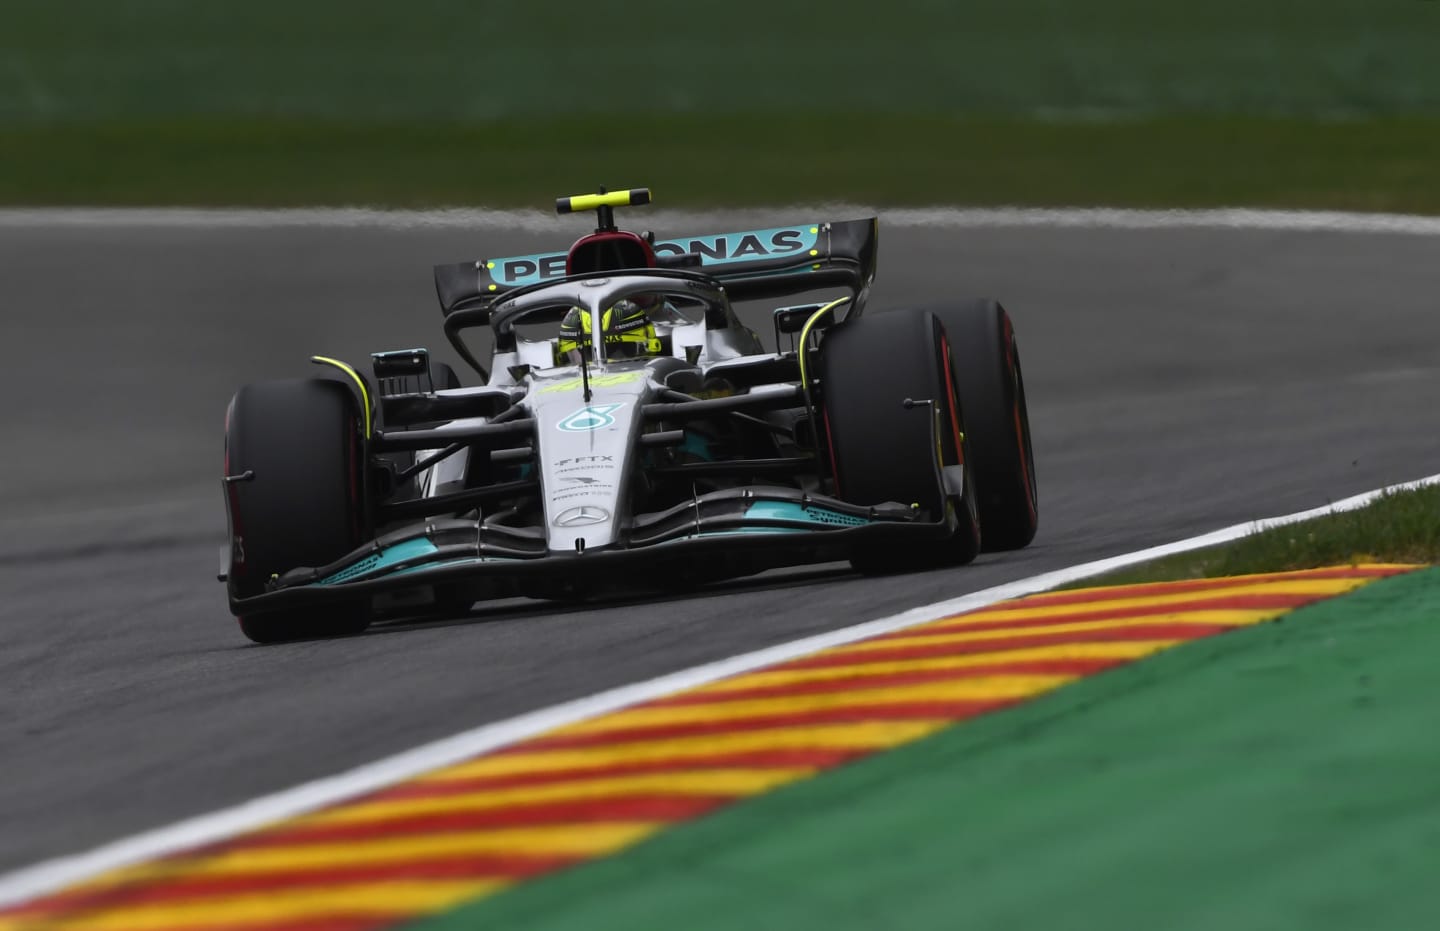 SPA, BELGIUM - AUGUST 27: Lewis Hamilton of Great Britain driving the (44) Mercedes AMG Petronas F1 Team W13 on track during qualifying ahead of the F1 Grand Prix of Belgium at Circuit de Spa-Francorchamps on August 27, 2022 in Spa, Belgium. (Photo by Rudy Carezzevoli/Getty Images)